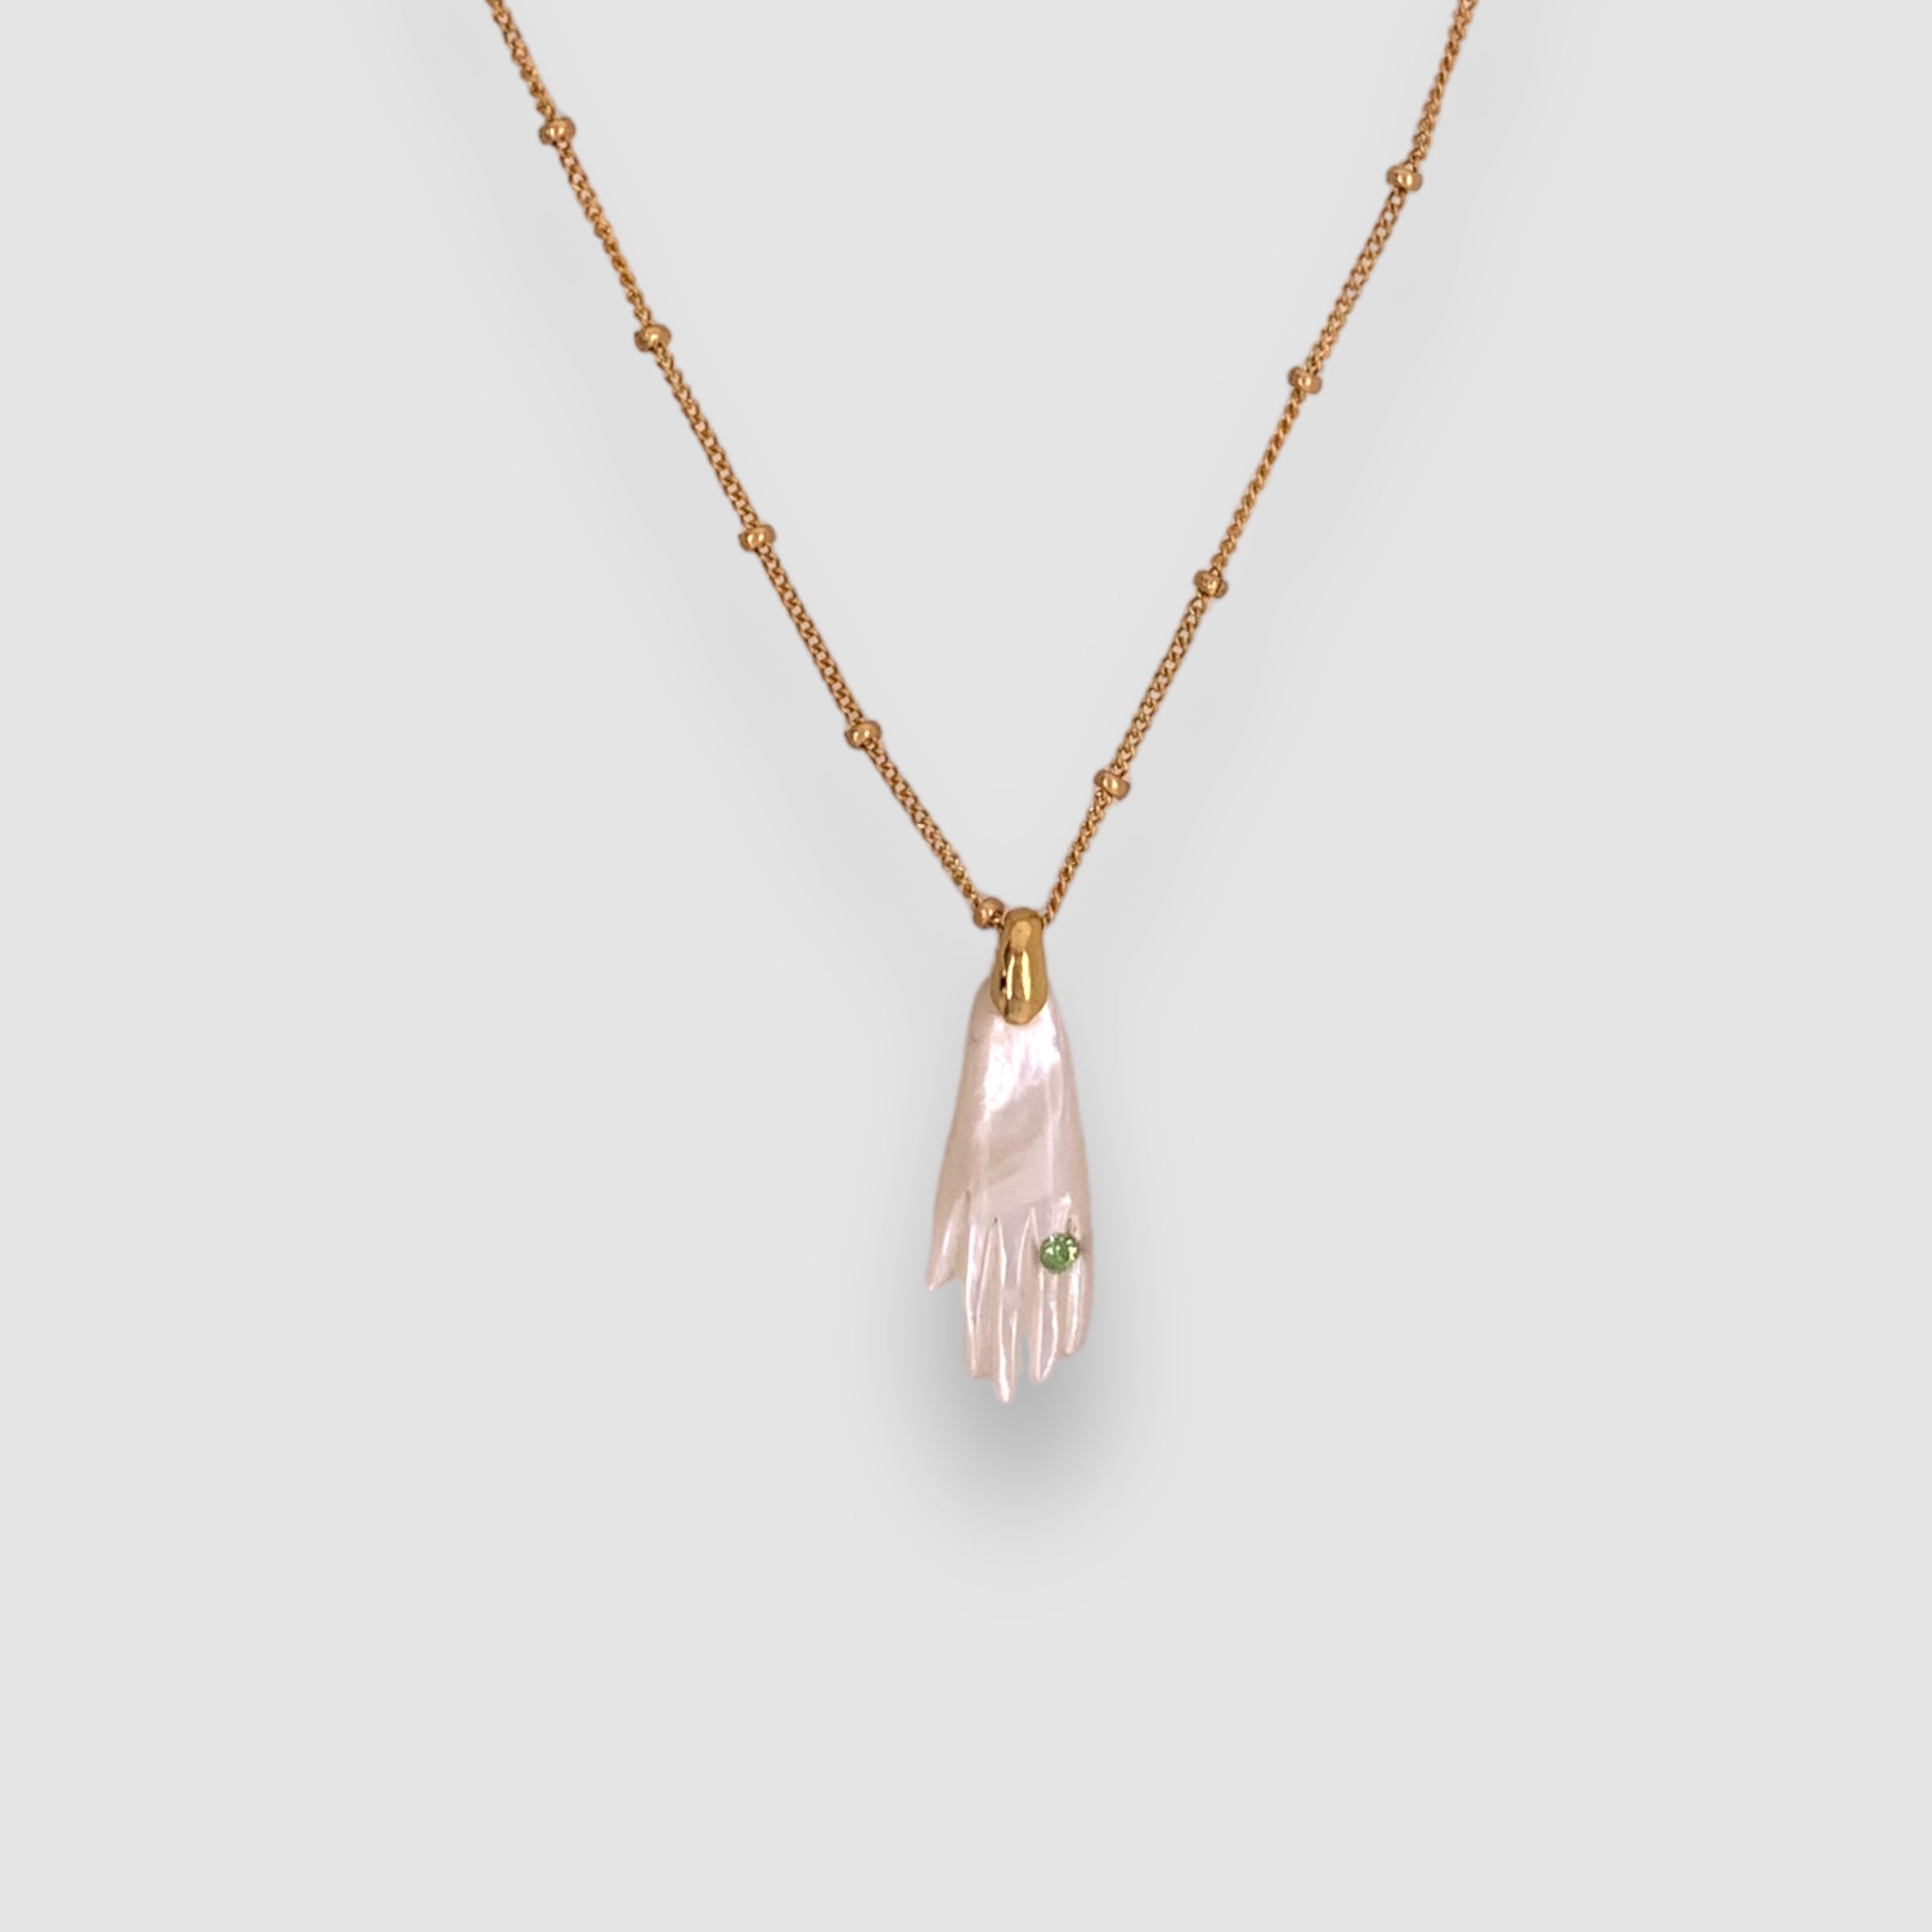 POESIA DEL MAR // NECKLACE // MOTHER OF PEARL // HAND // GREEN